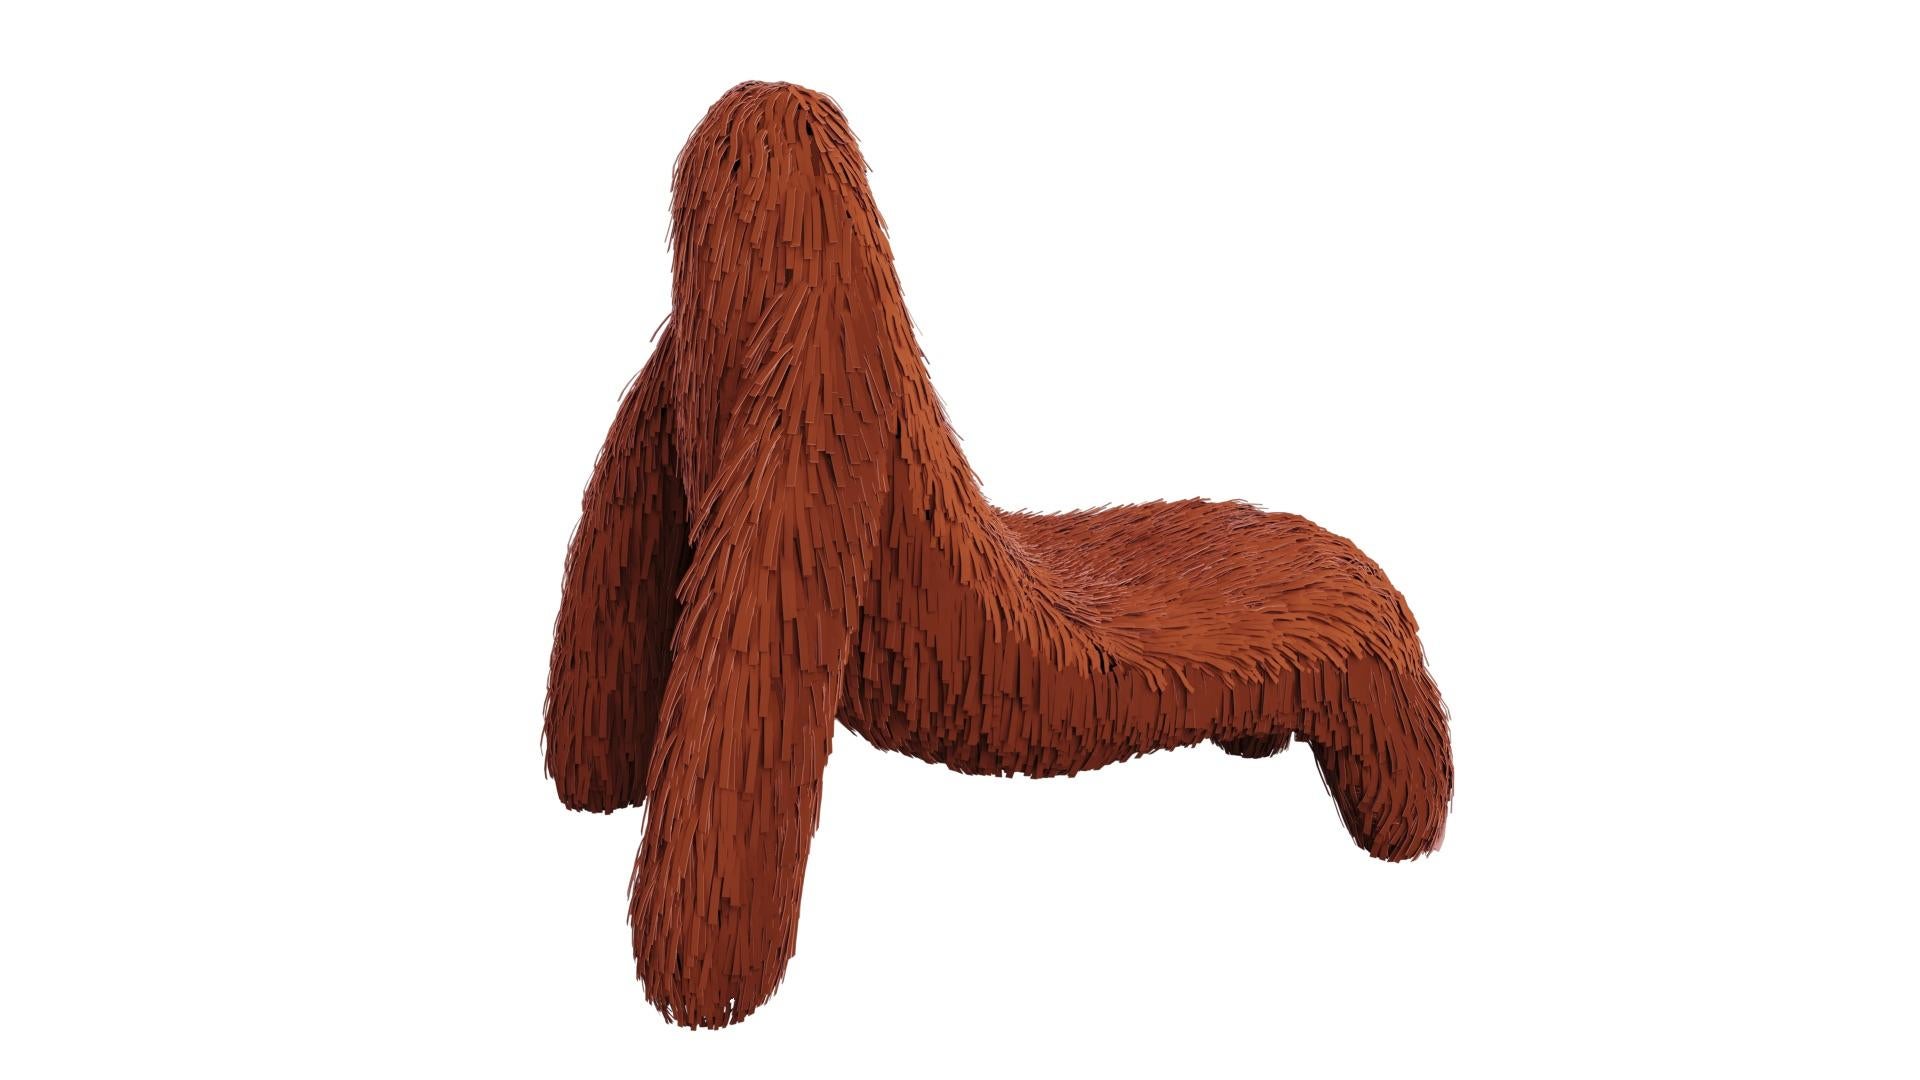 Gorilla Chair with Real Red Leather by Marcantonio is an ape shaped seat with a rich red leather covering. A lounge chair with a fantastic, unique shape. 

For his debut creations, Marcantonio introduced “Vegetal Animal”, a concept that evokes